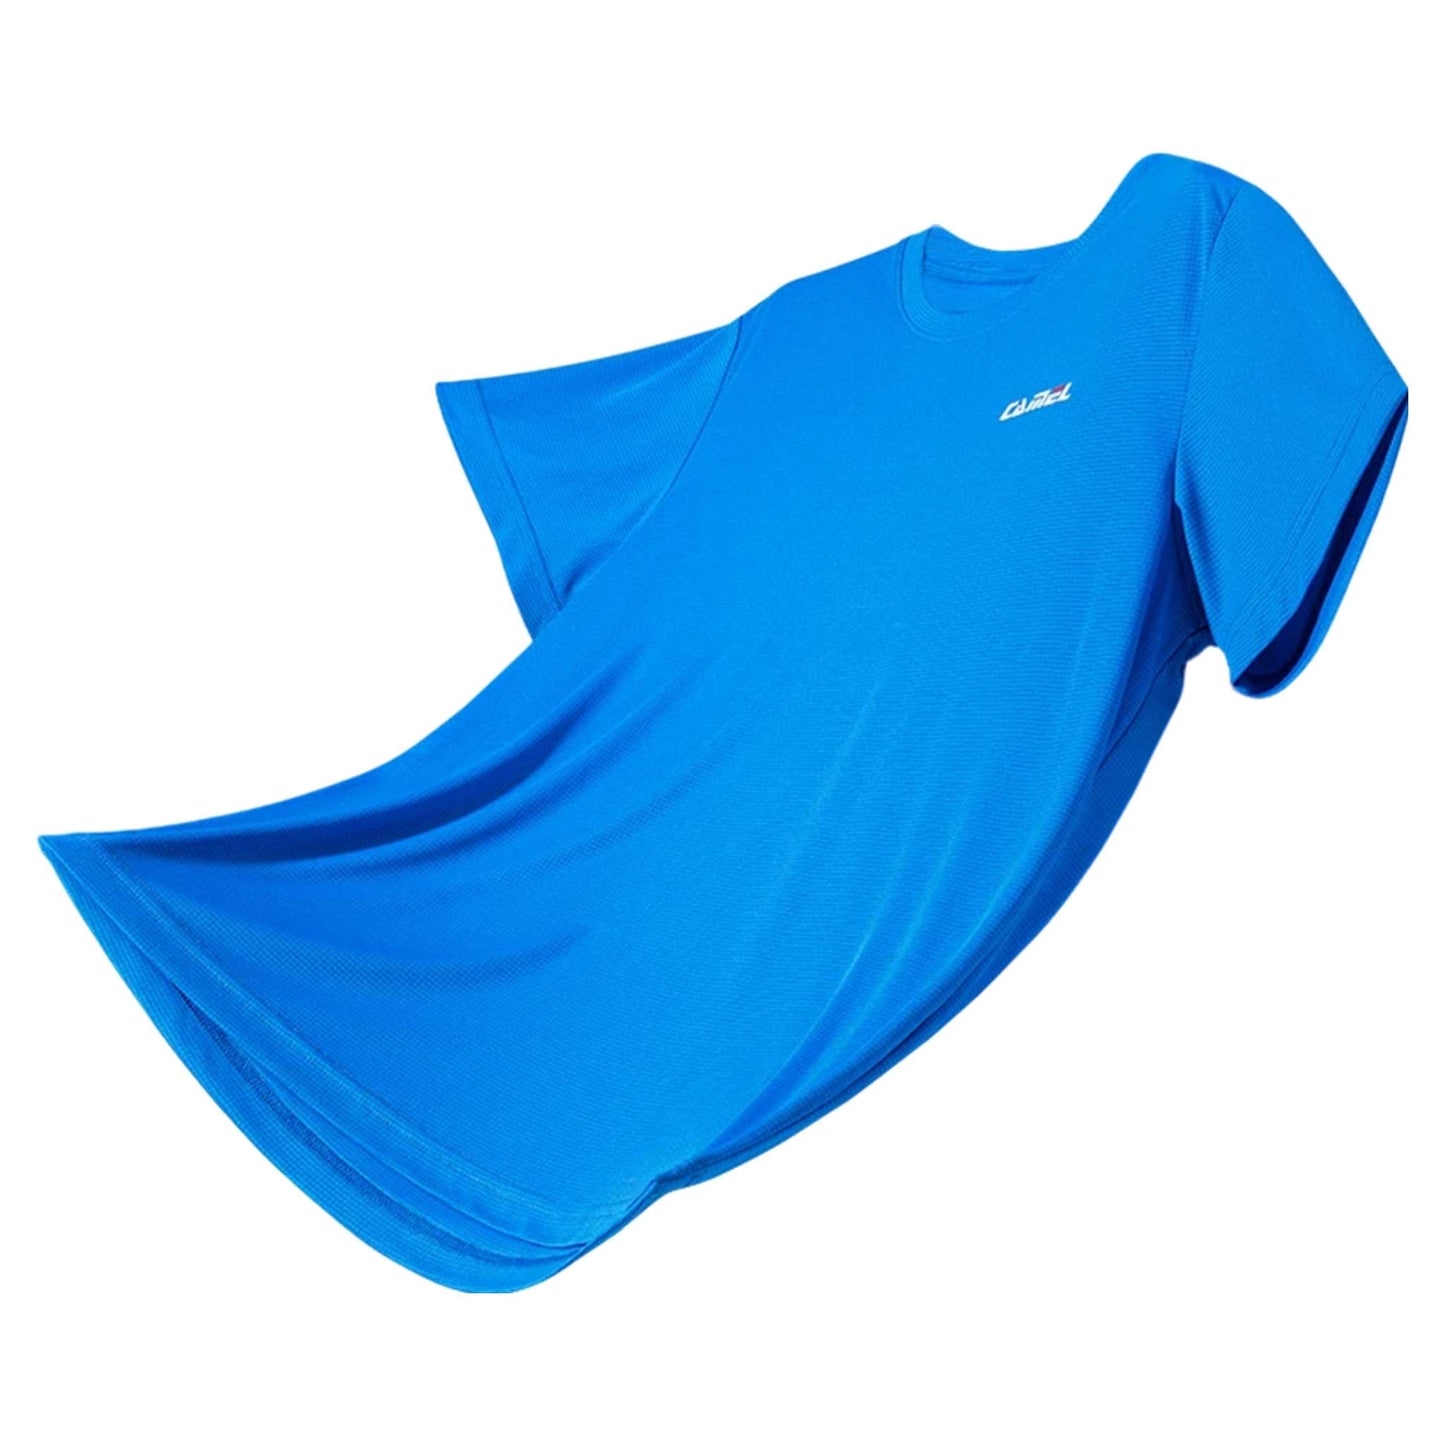 Men's Quick-Dry Outdoor Tee - Breathable & Lightweight for Hiking and Sports